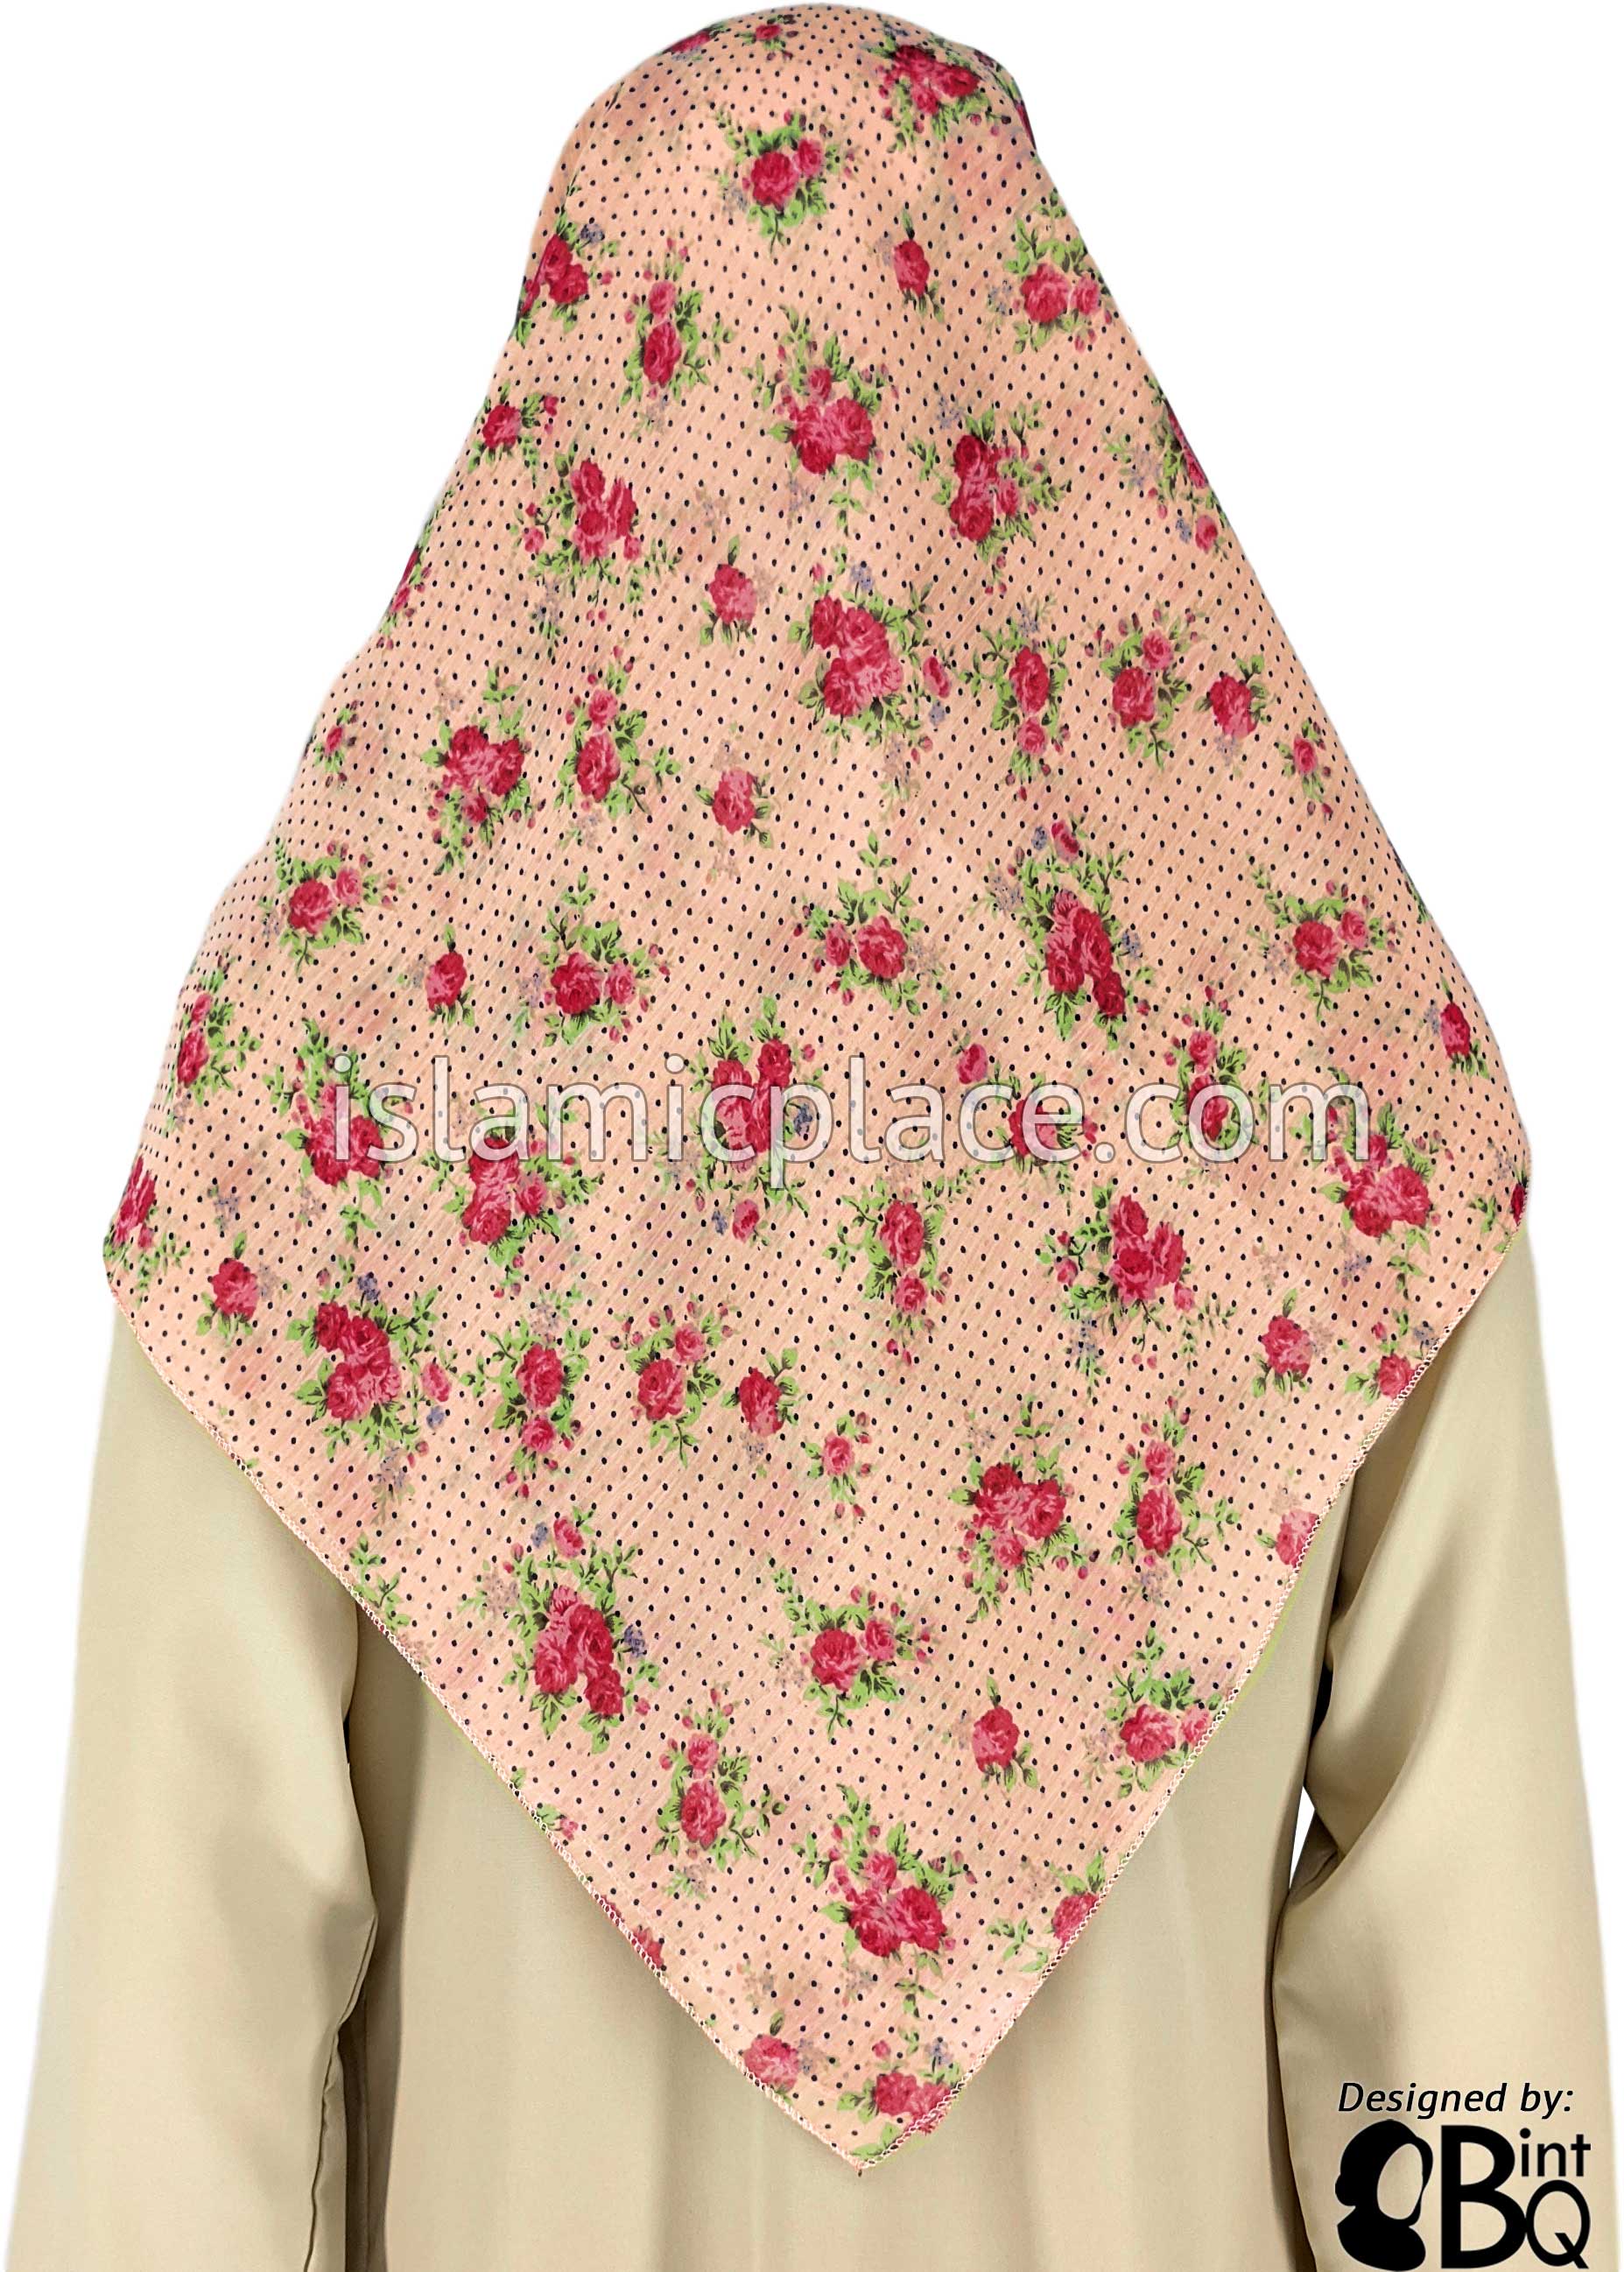 Red Rose Bunches On Salmon - 45" Square Printed Khimar